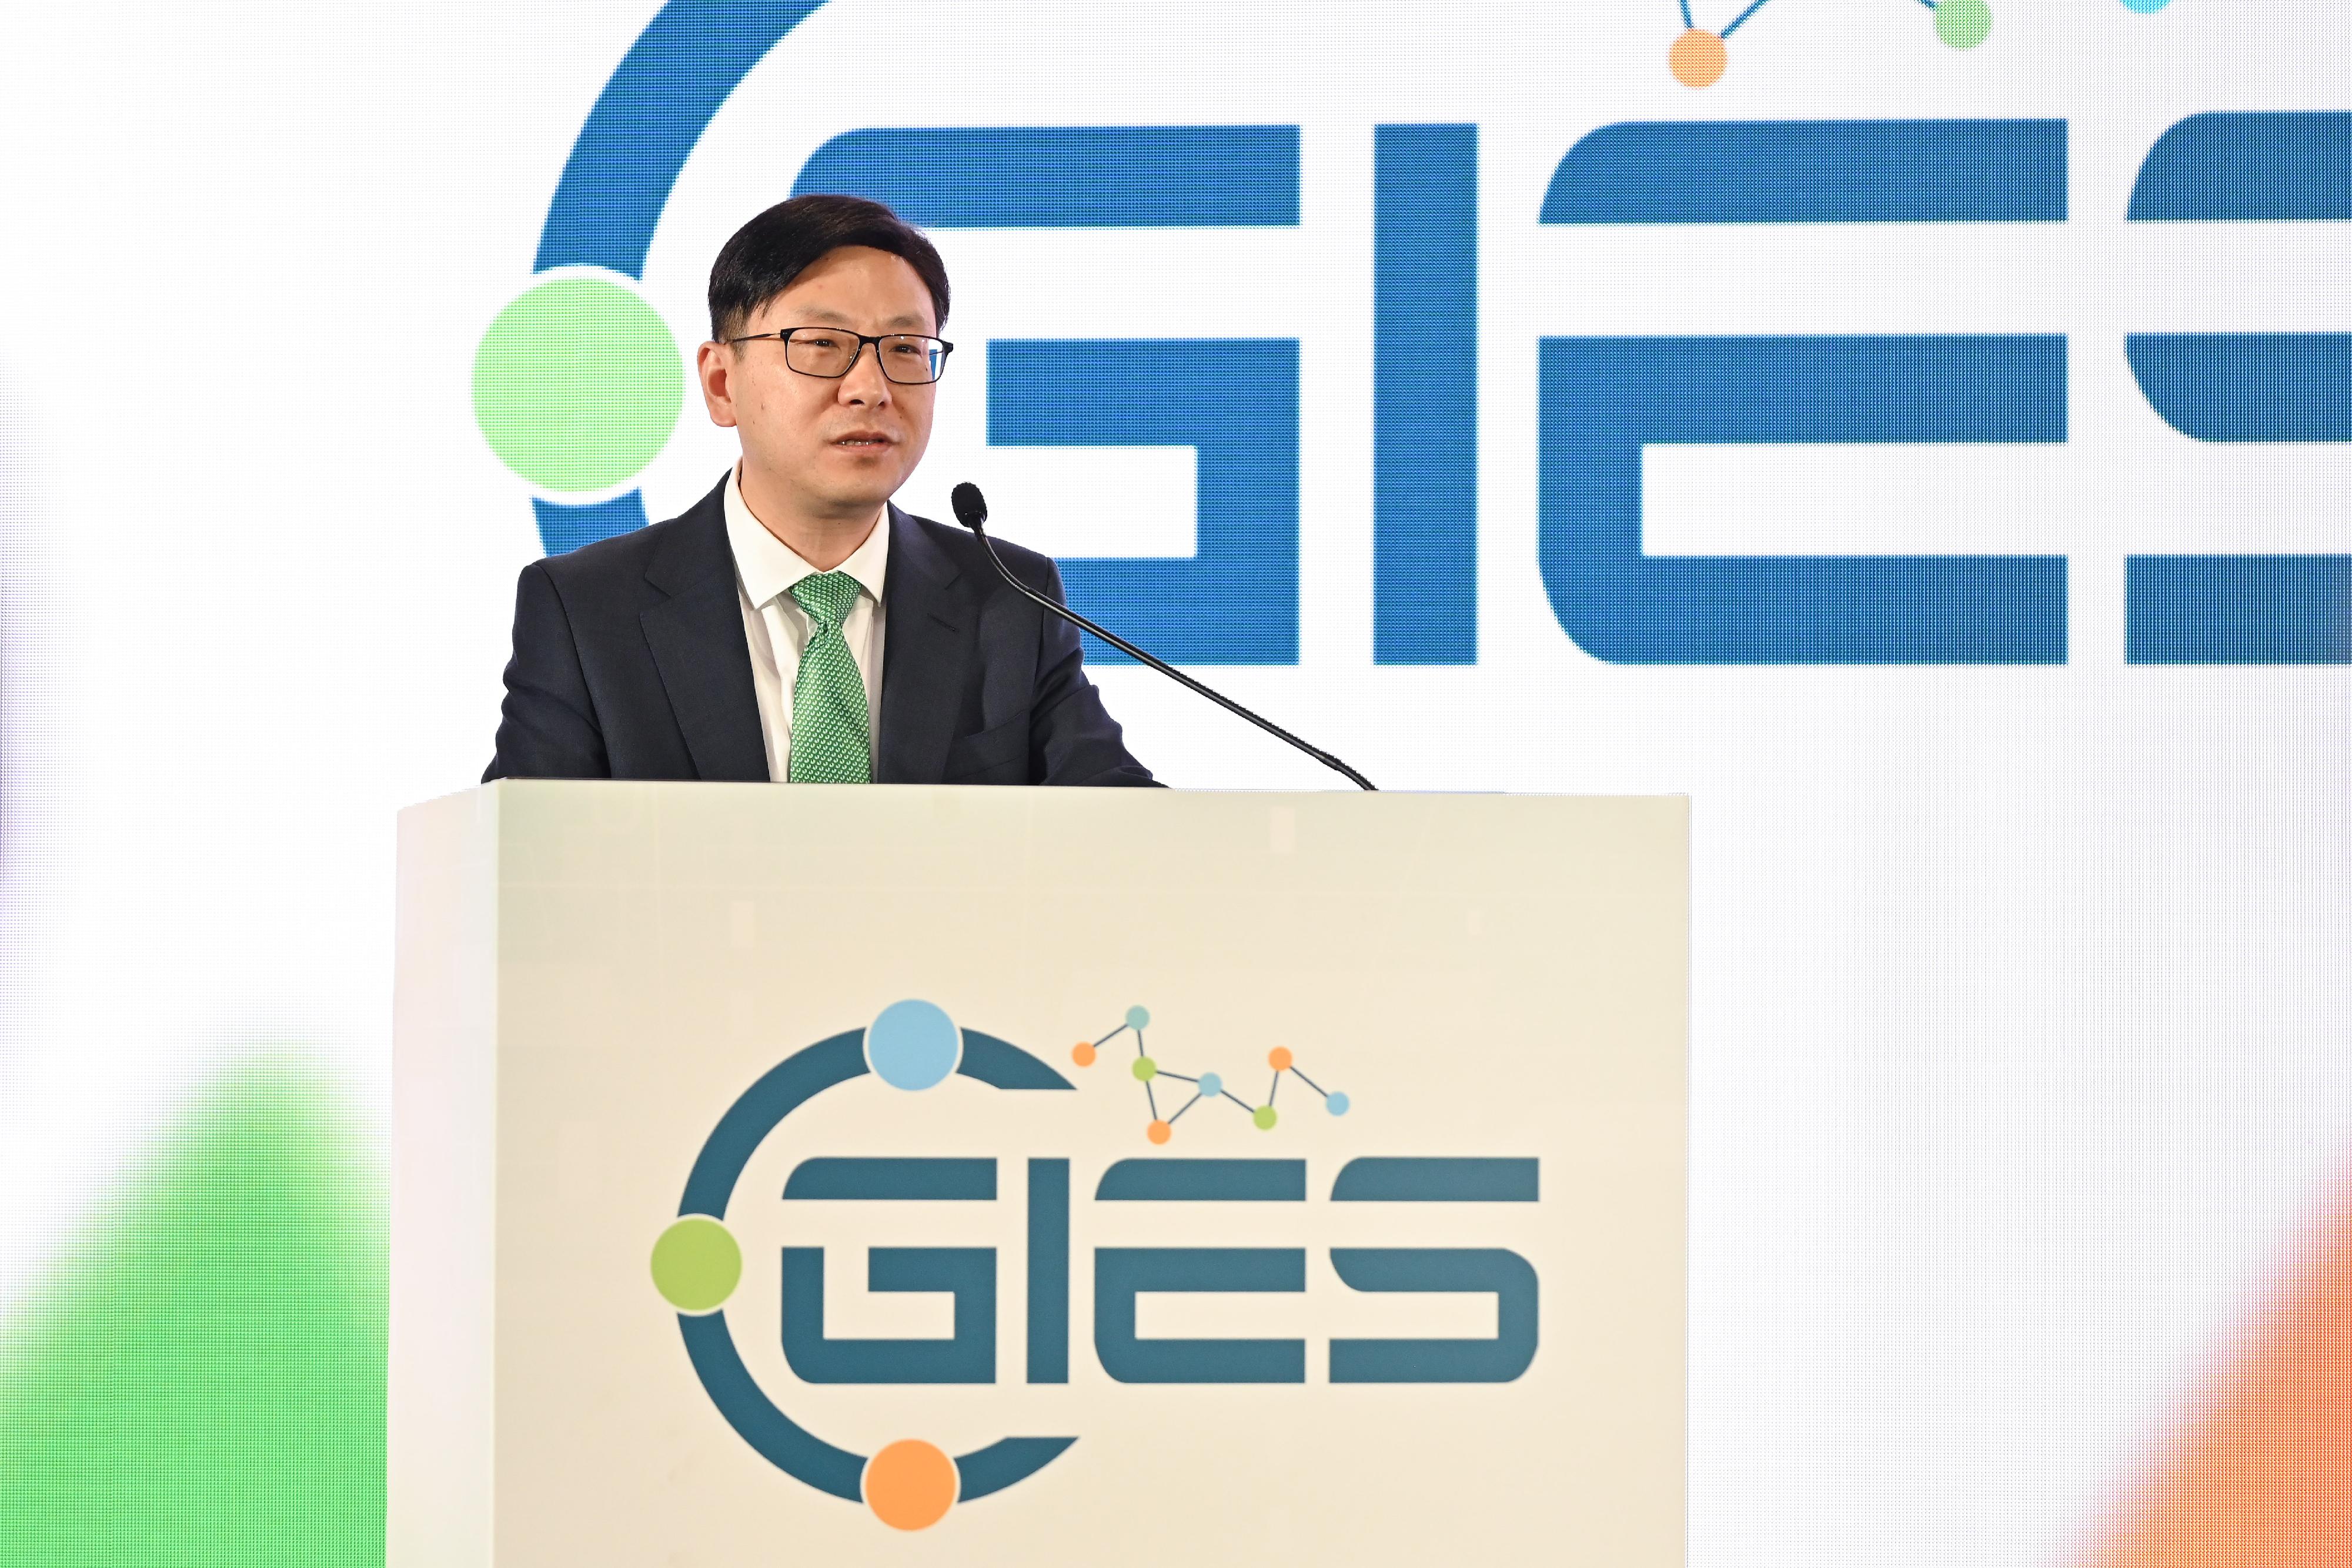 The Secretary for Labour and Welfare, Mr Chris Sun, today (November 23) officiated at the opening ceremony of the Gerontech and Innovation Expo cum Summit 2023 co-hosted by the Government and the Hong Kong Council of Social Service. Photo shows Mr Sun delivering his opening remarks.